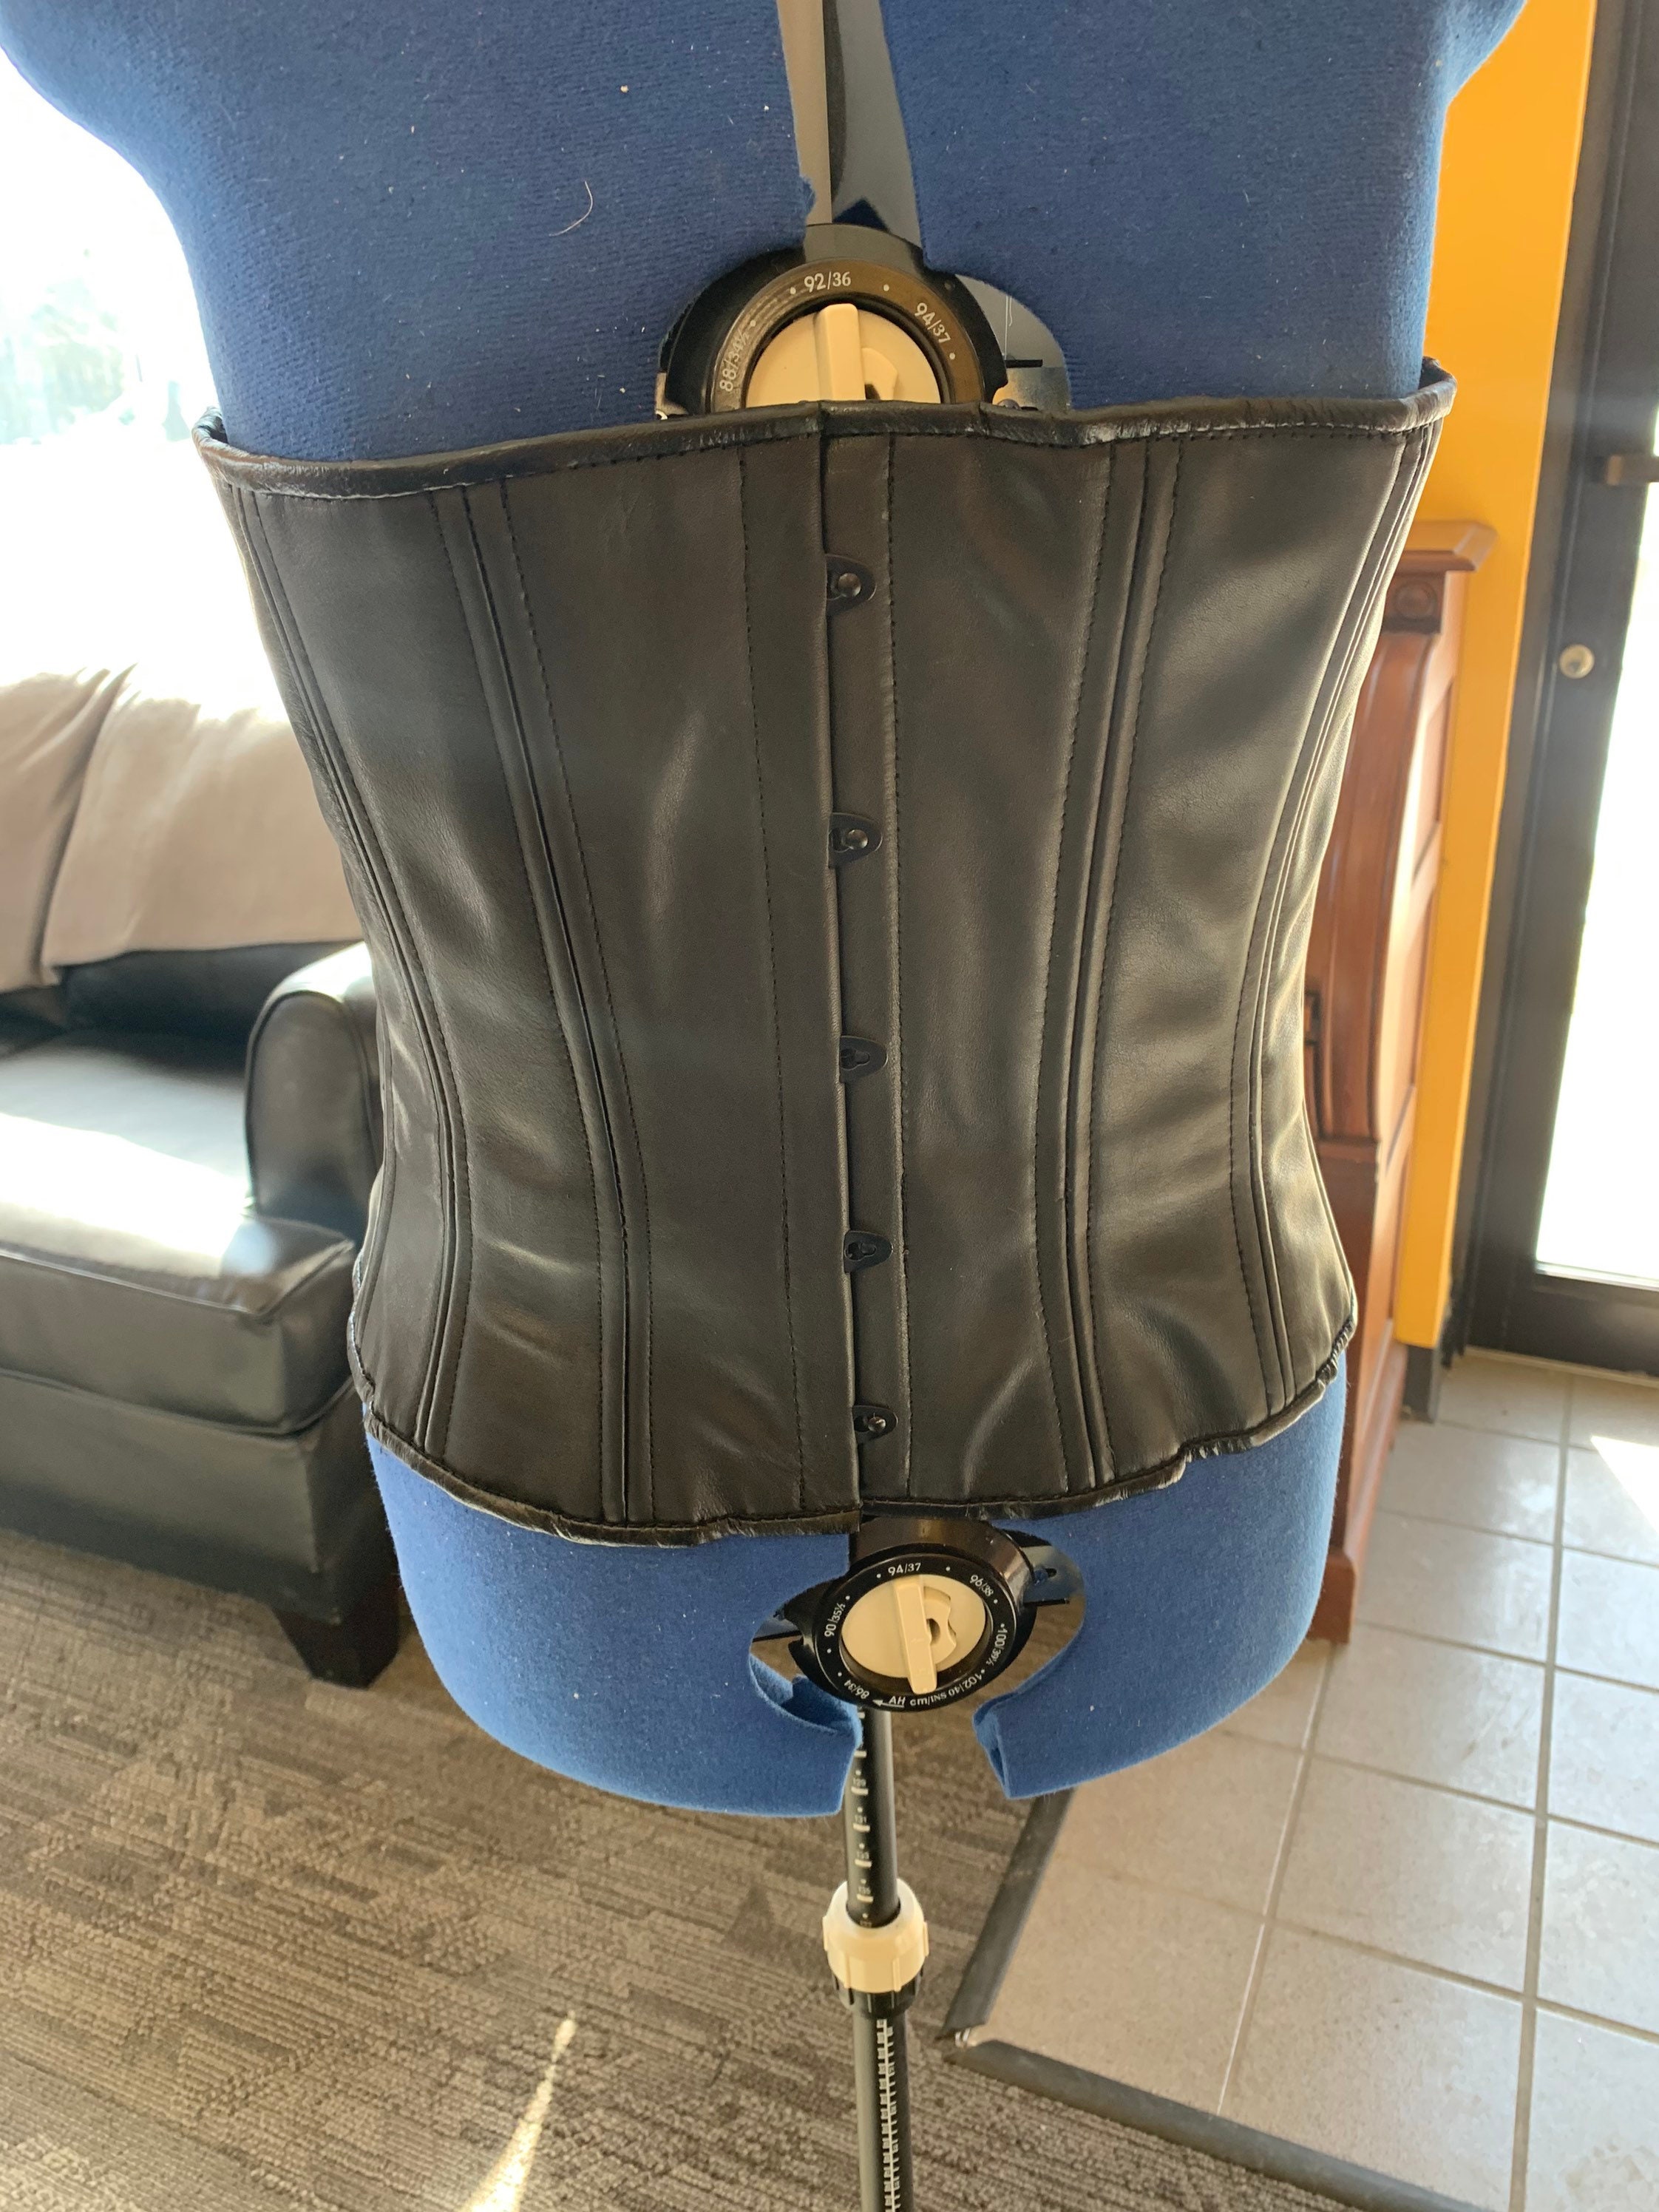 Corset for men to enhance the classic male figure